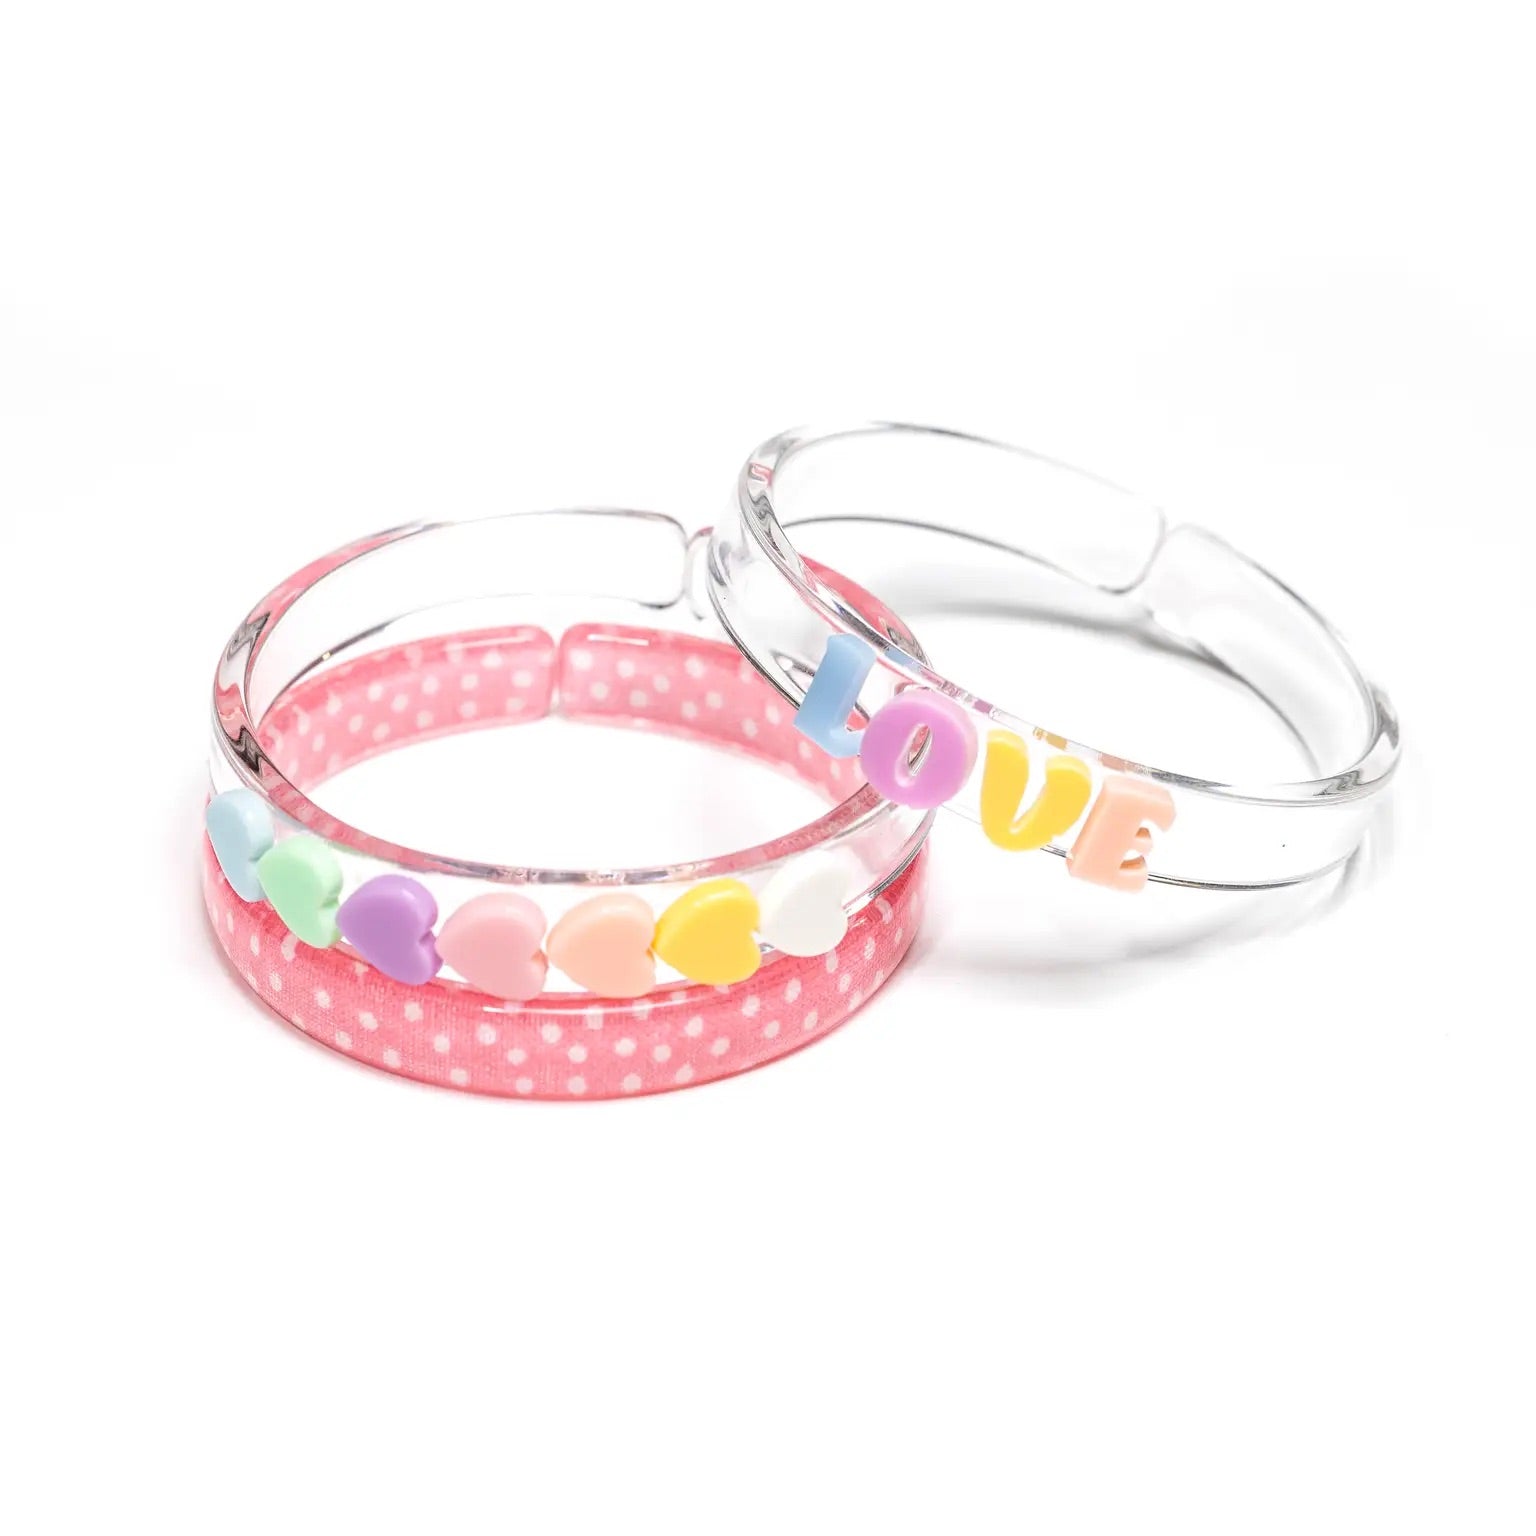 Lilies & Roses Single Candy Color Bangle Bracelet - LOVE / Hearts / Pink with Dots